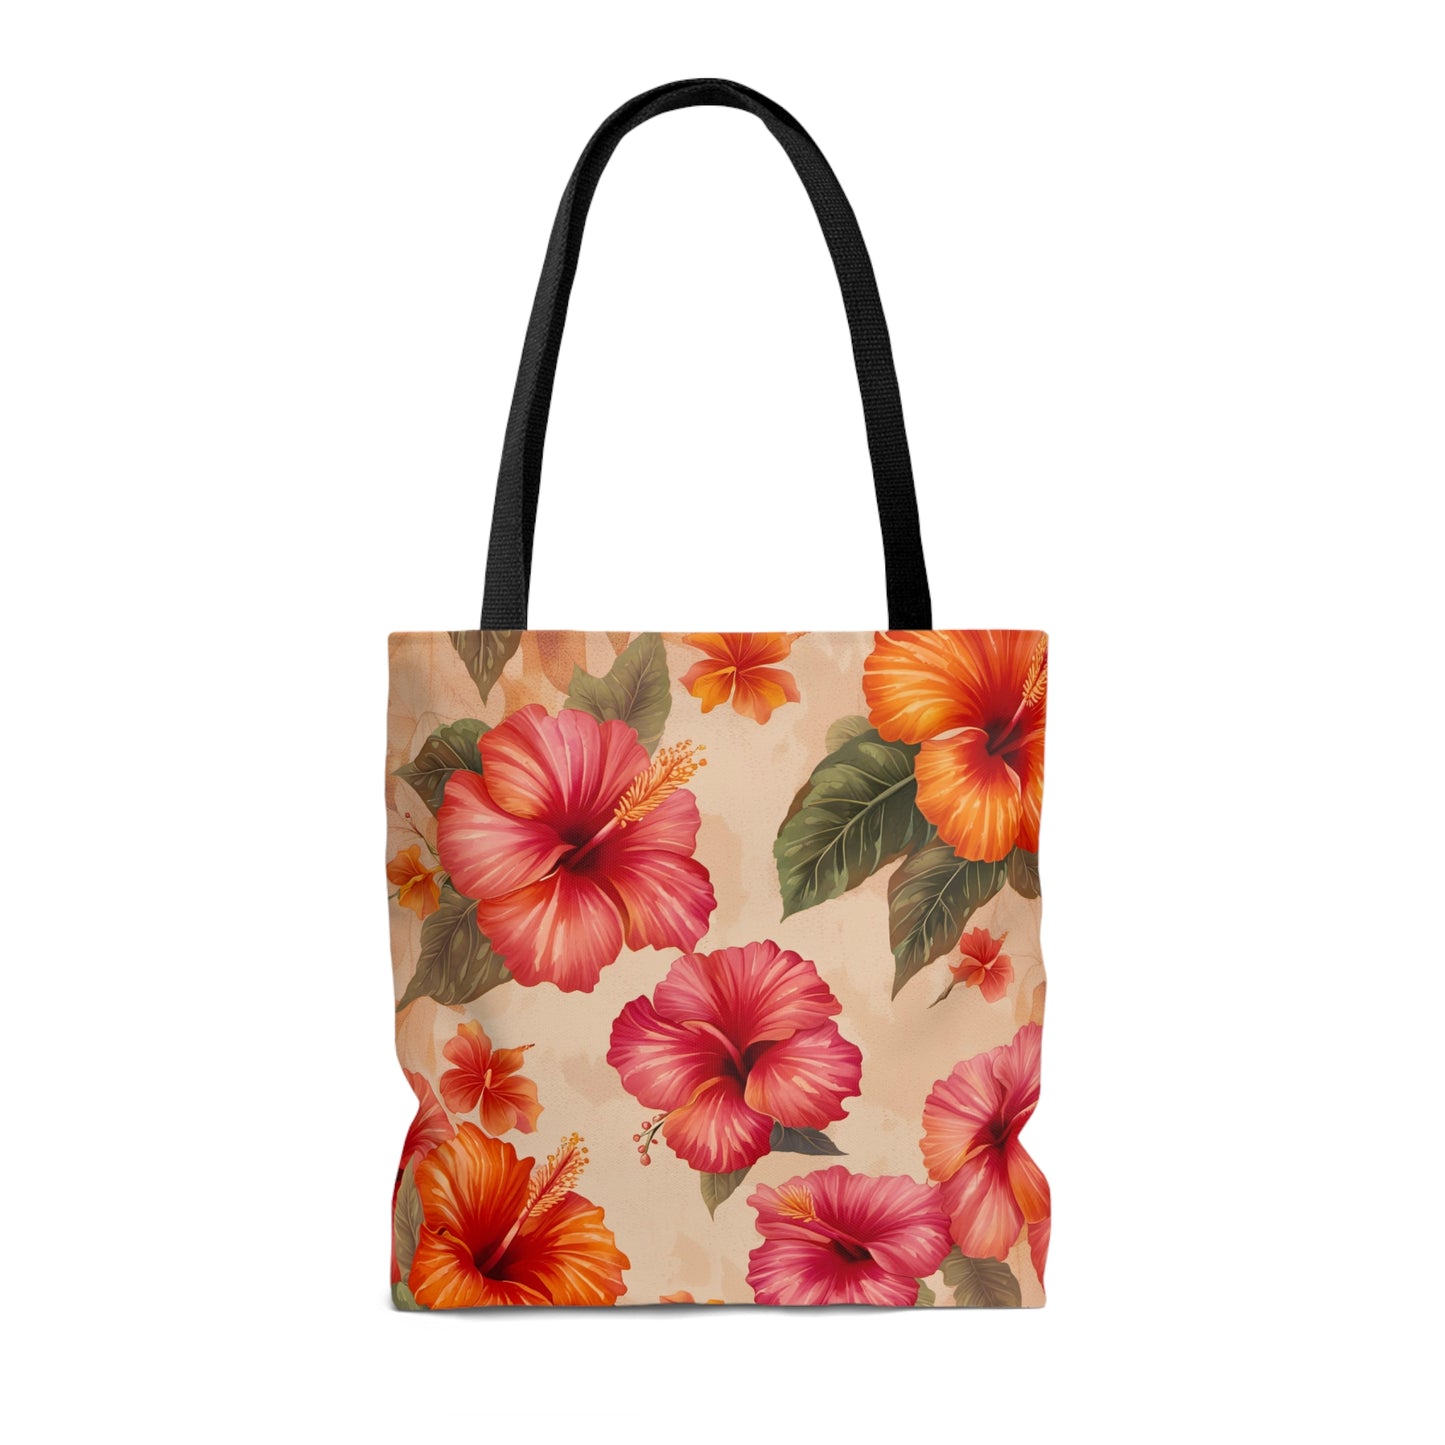 Pink and Orange Hibiscus Flower Printed on Tote Bag front